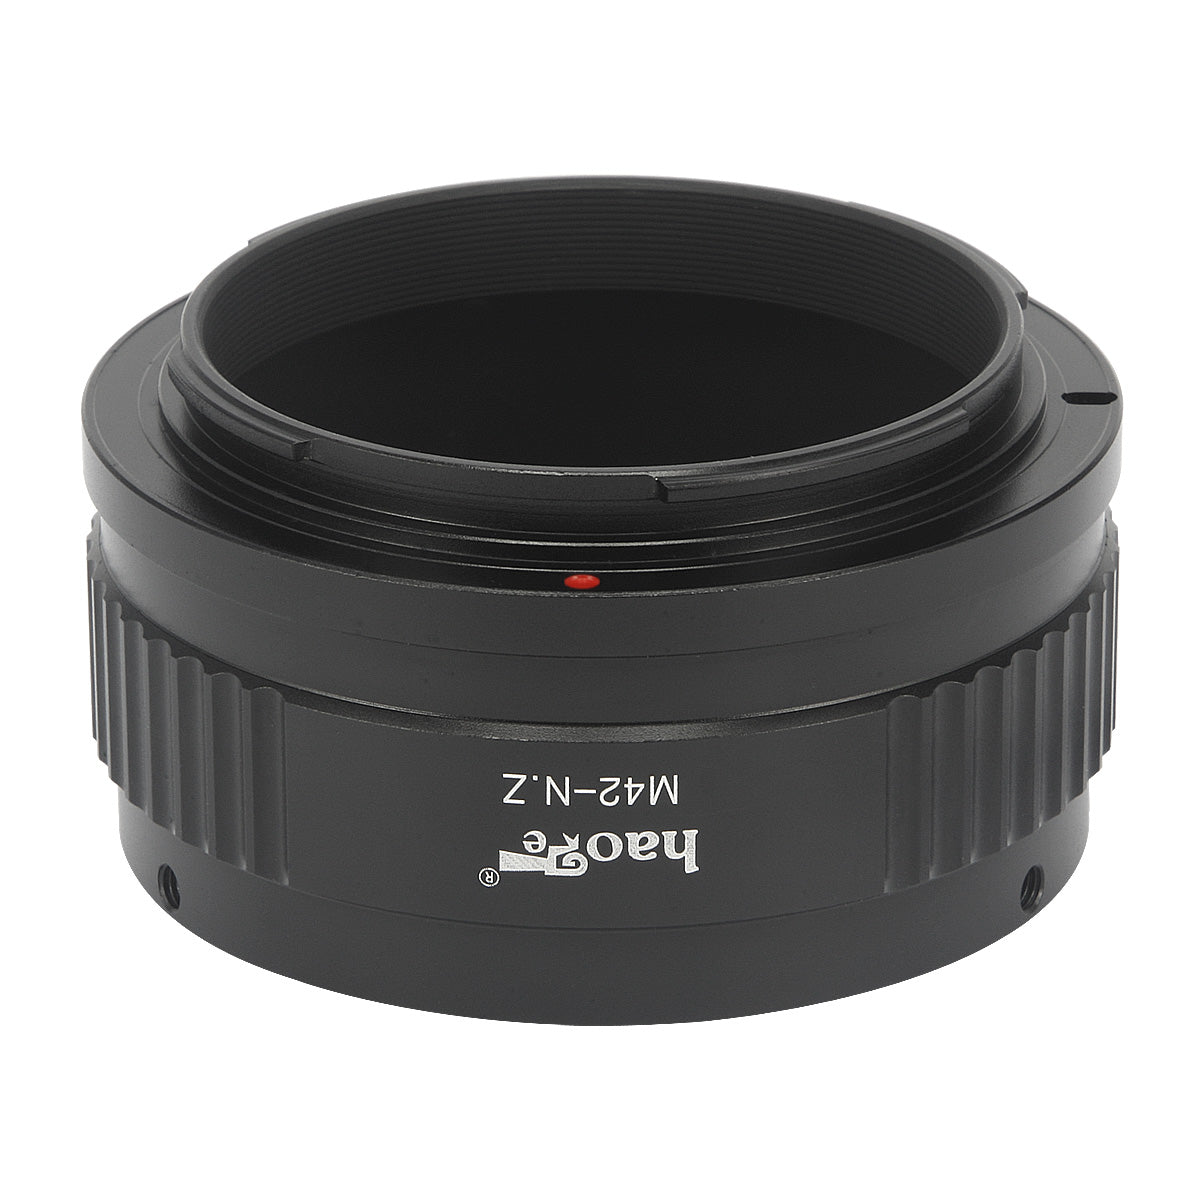 Haoge Manual Lens Mount Adapter for 42mm M42 Mount Lens to Nikon Z Mount Camera Such as Z6 Z7